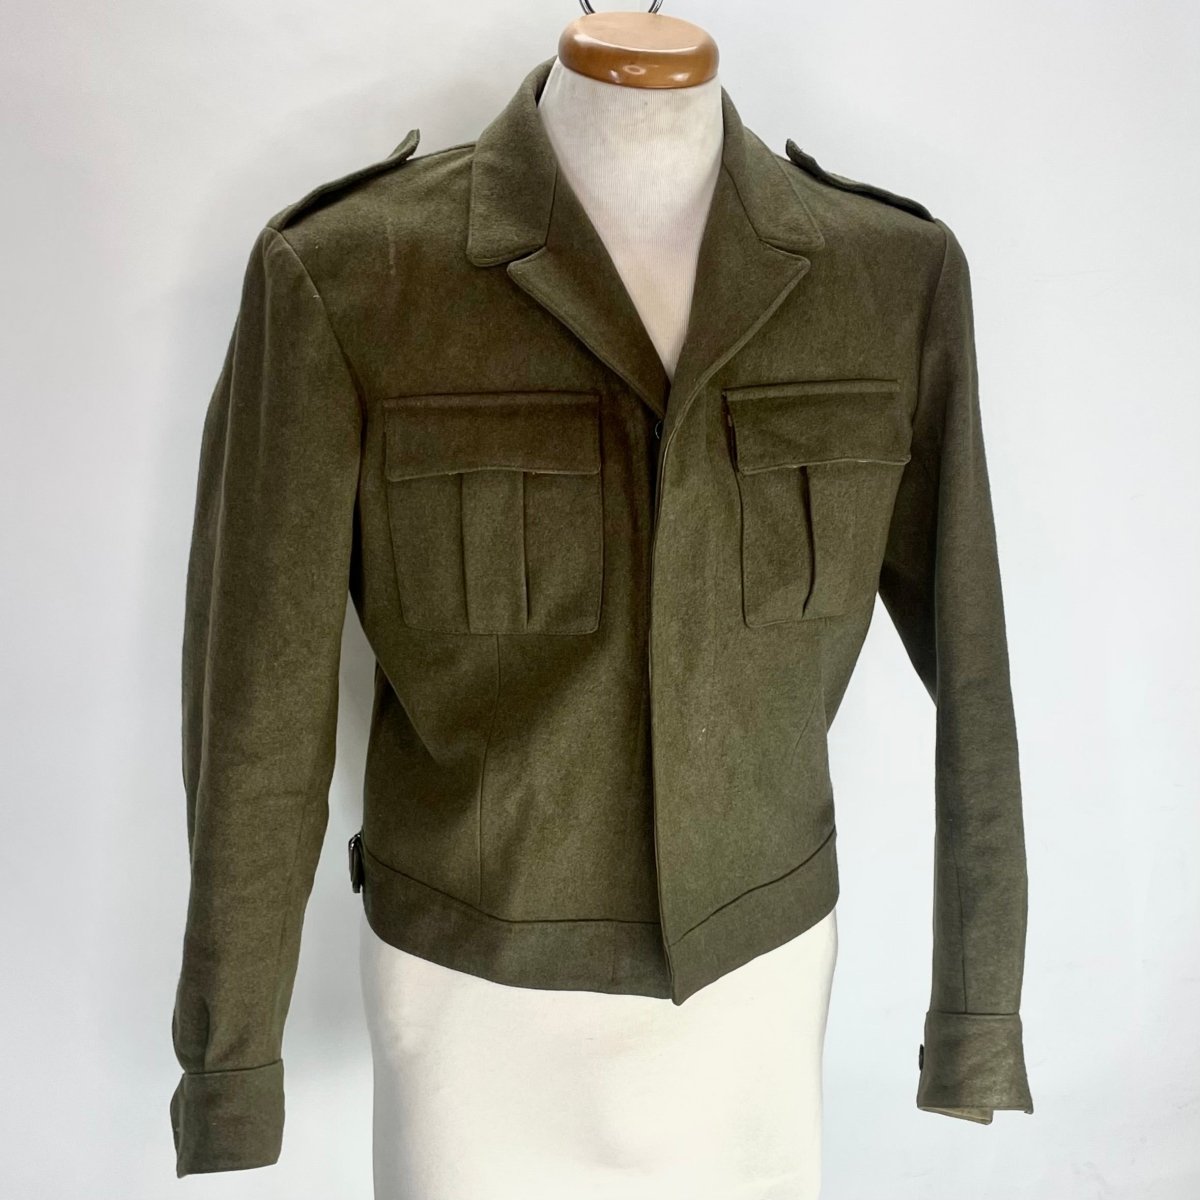 Army Green Wool Military Style Jacket - Hart & Hive